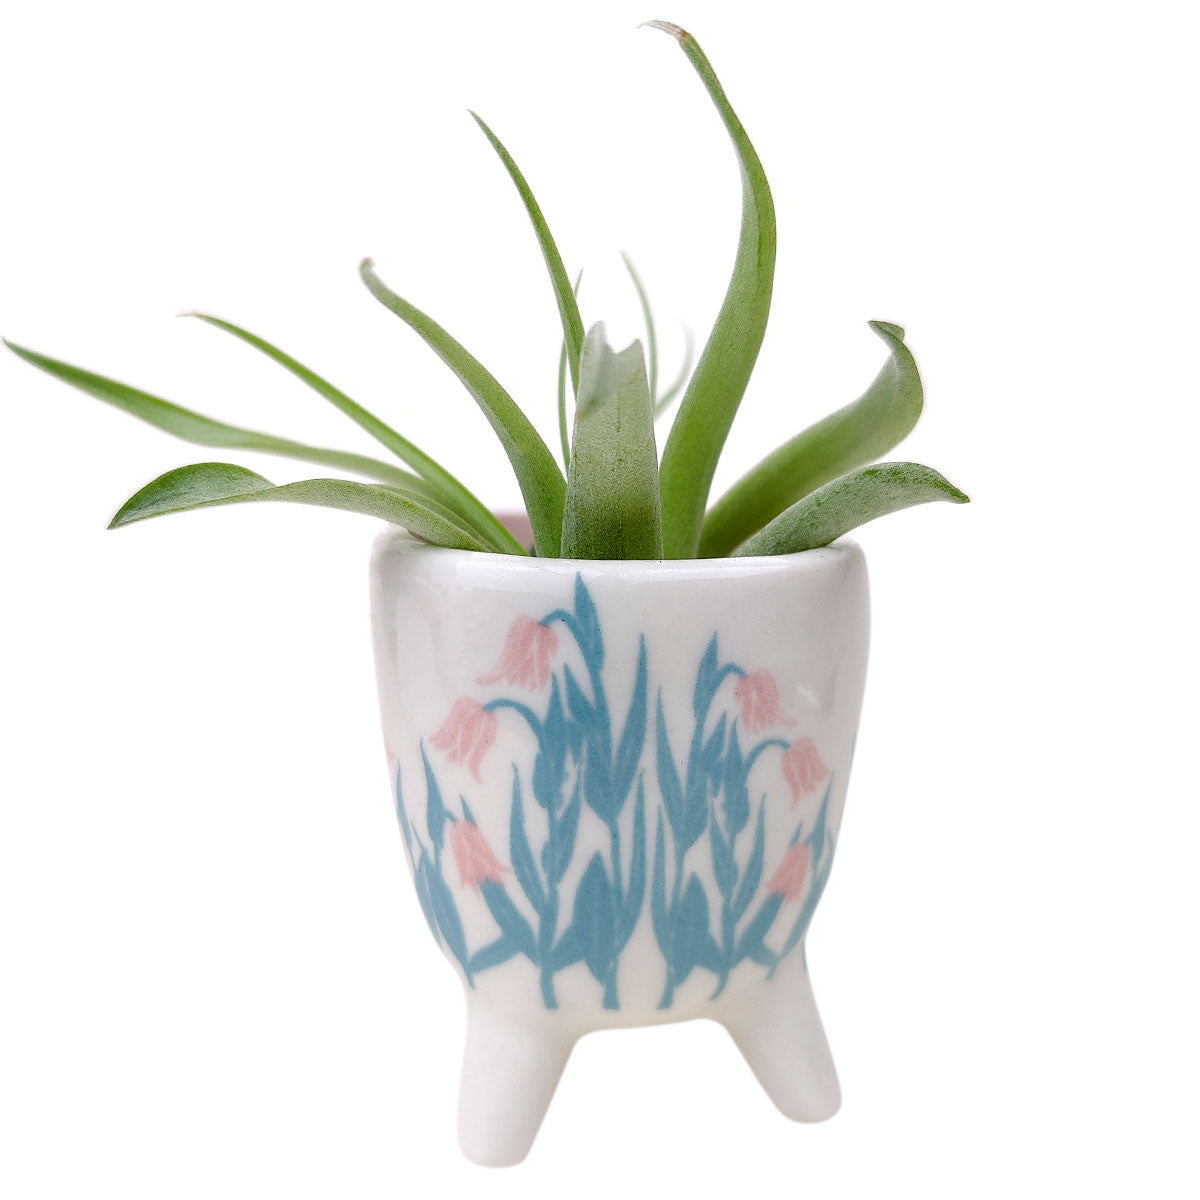 Spring Footed Pot for sale, Ceramic Pot for succulents and flowers, Modern style flower pot for sale, Succulent gift decor ideas